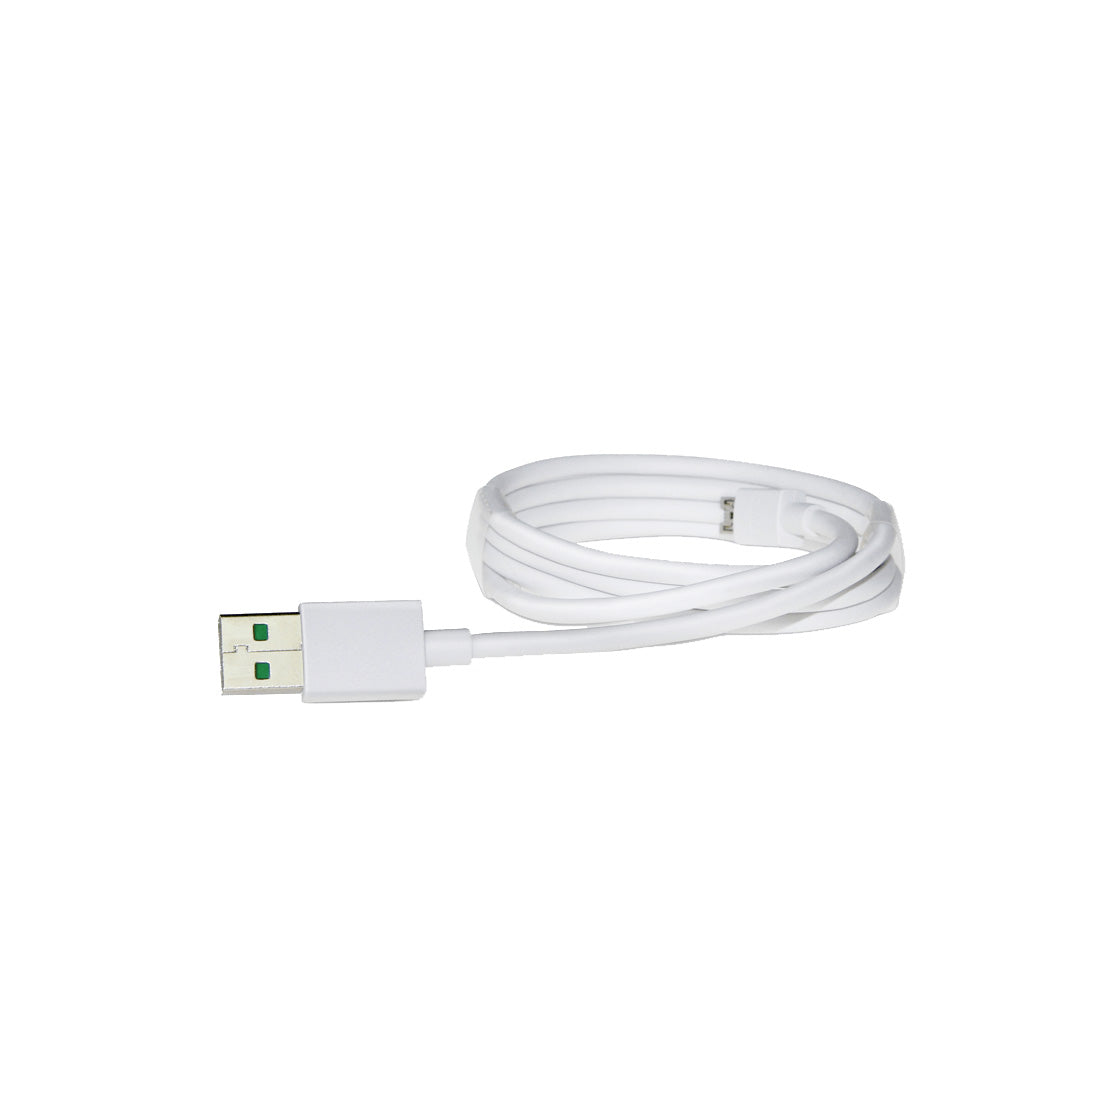 [OEM PACKAGE] OPPO VOOC Micro USB Cable - OPPO Official Store